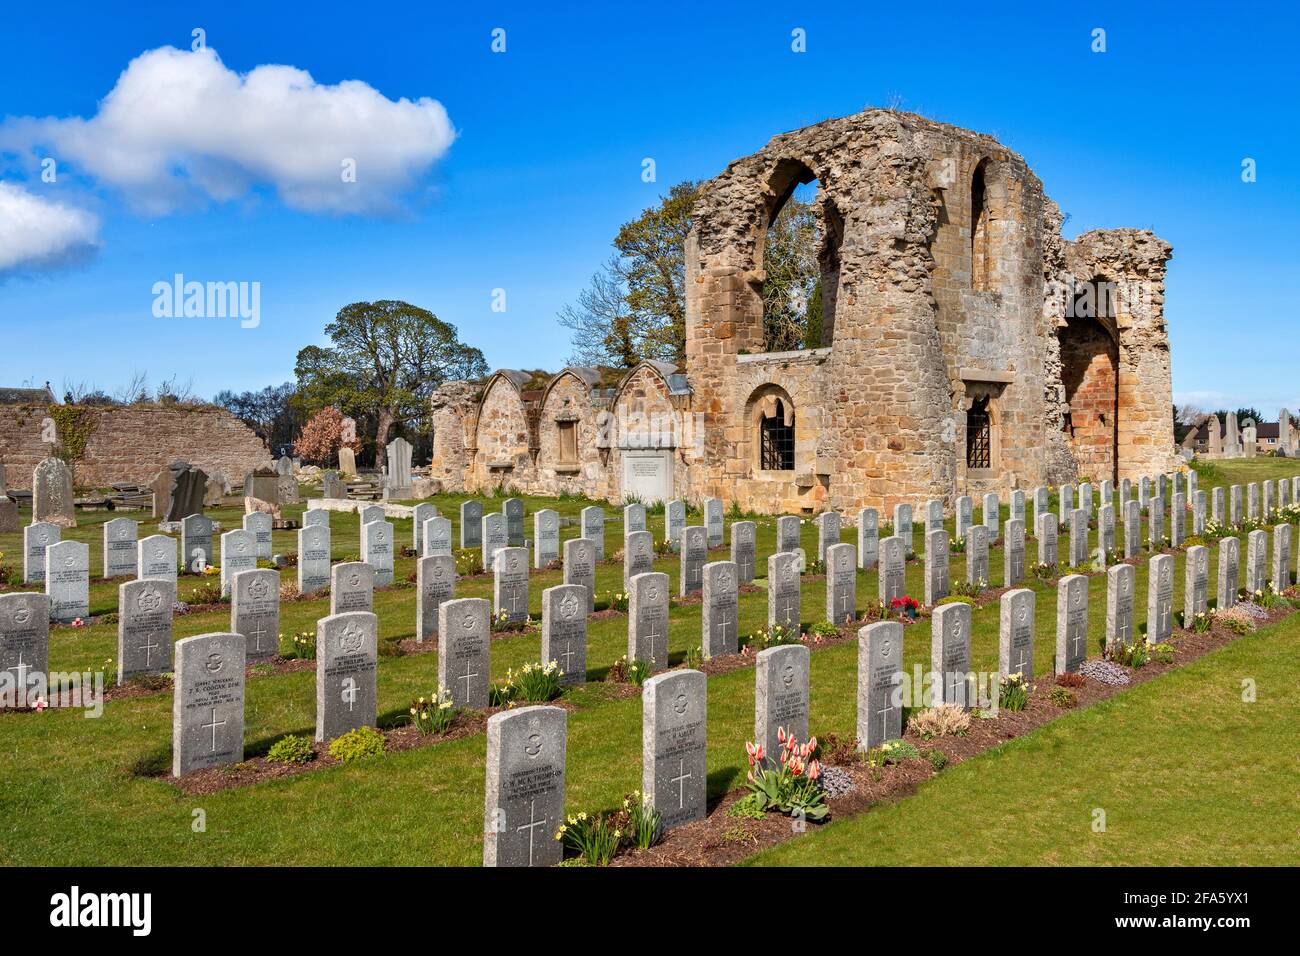 KINLOSS ABBEY MORAY SCOTLAND ROWS OF COMMONWEALTH AIR FORCE WAR GRAVE STONES IN FRONT OF THE ABBEY Stock Photo